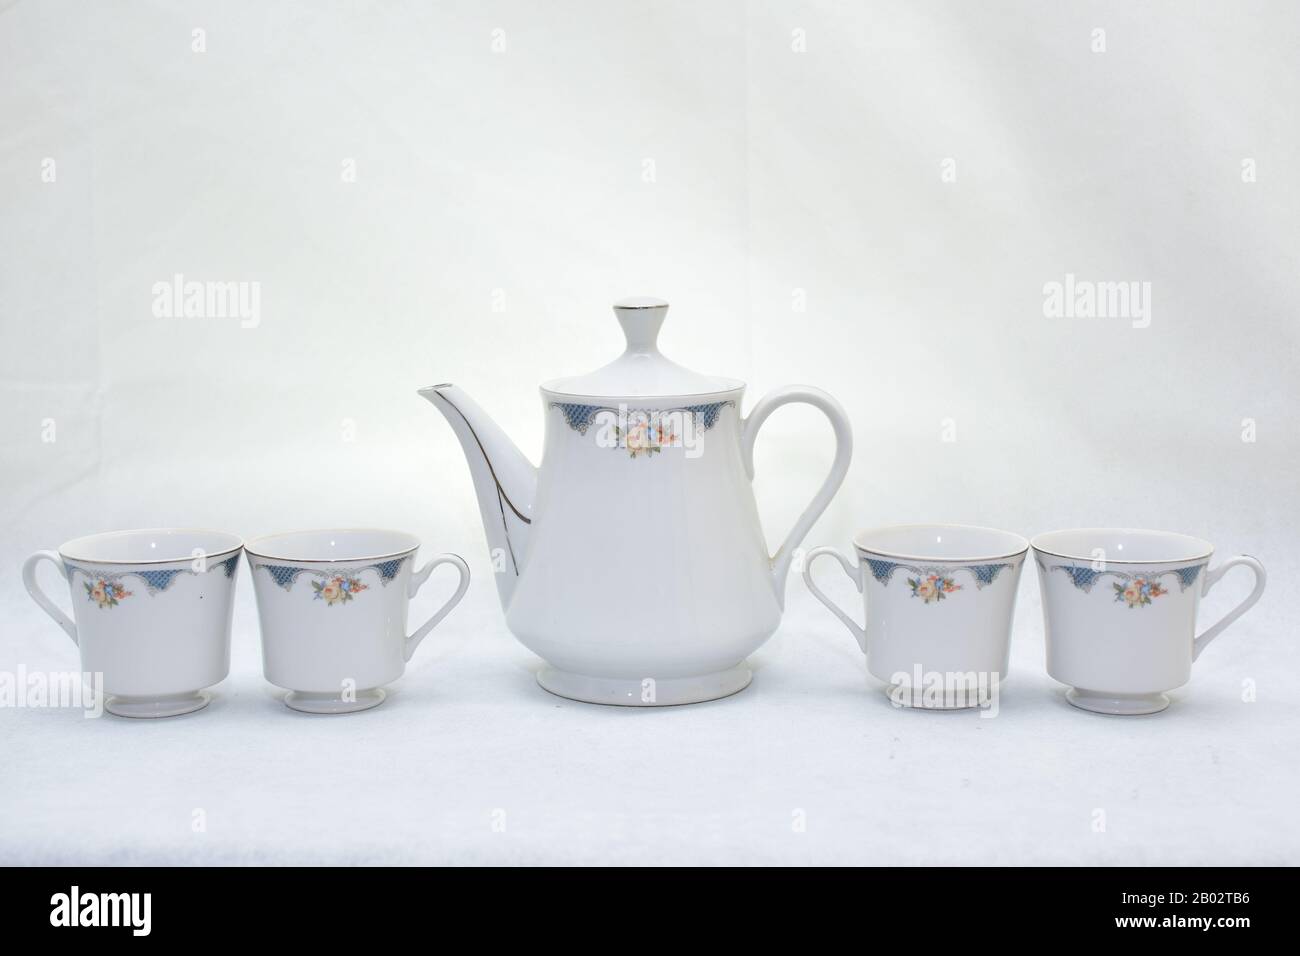 Mock Up Design Set Of Elegant And Traditional Teapot Colorful White And Blue Coffee Cup Tea Cup On Cup S Plate Beside The Hot Tea Pot Design Dr Stock Photo Alamy